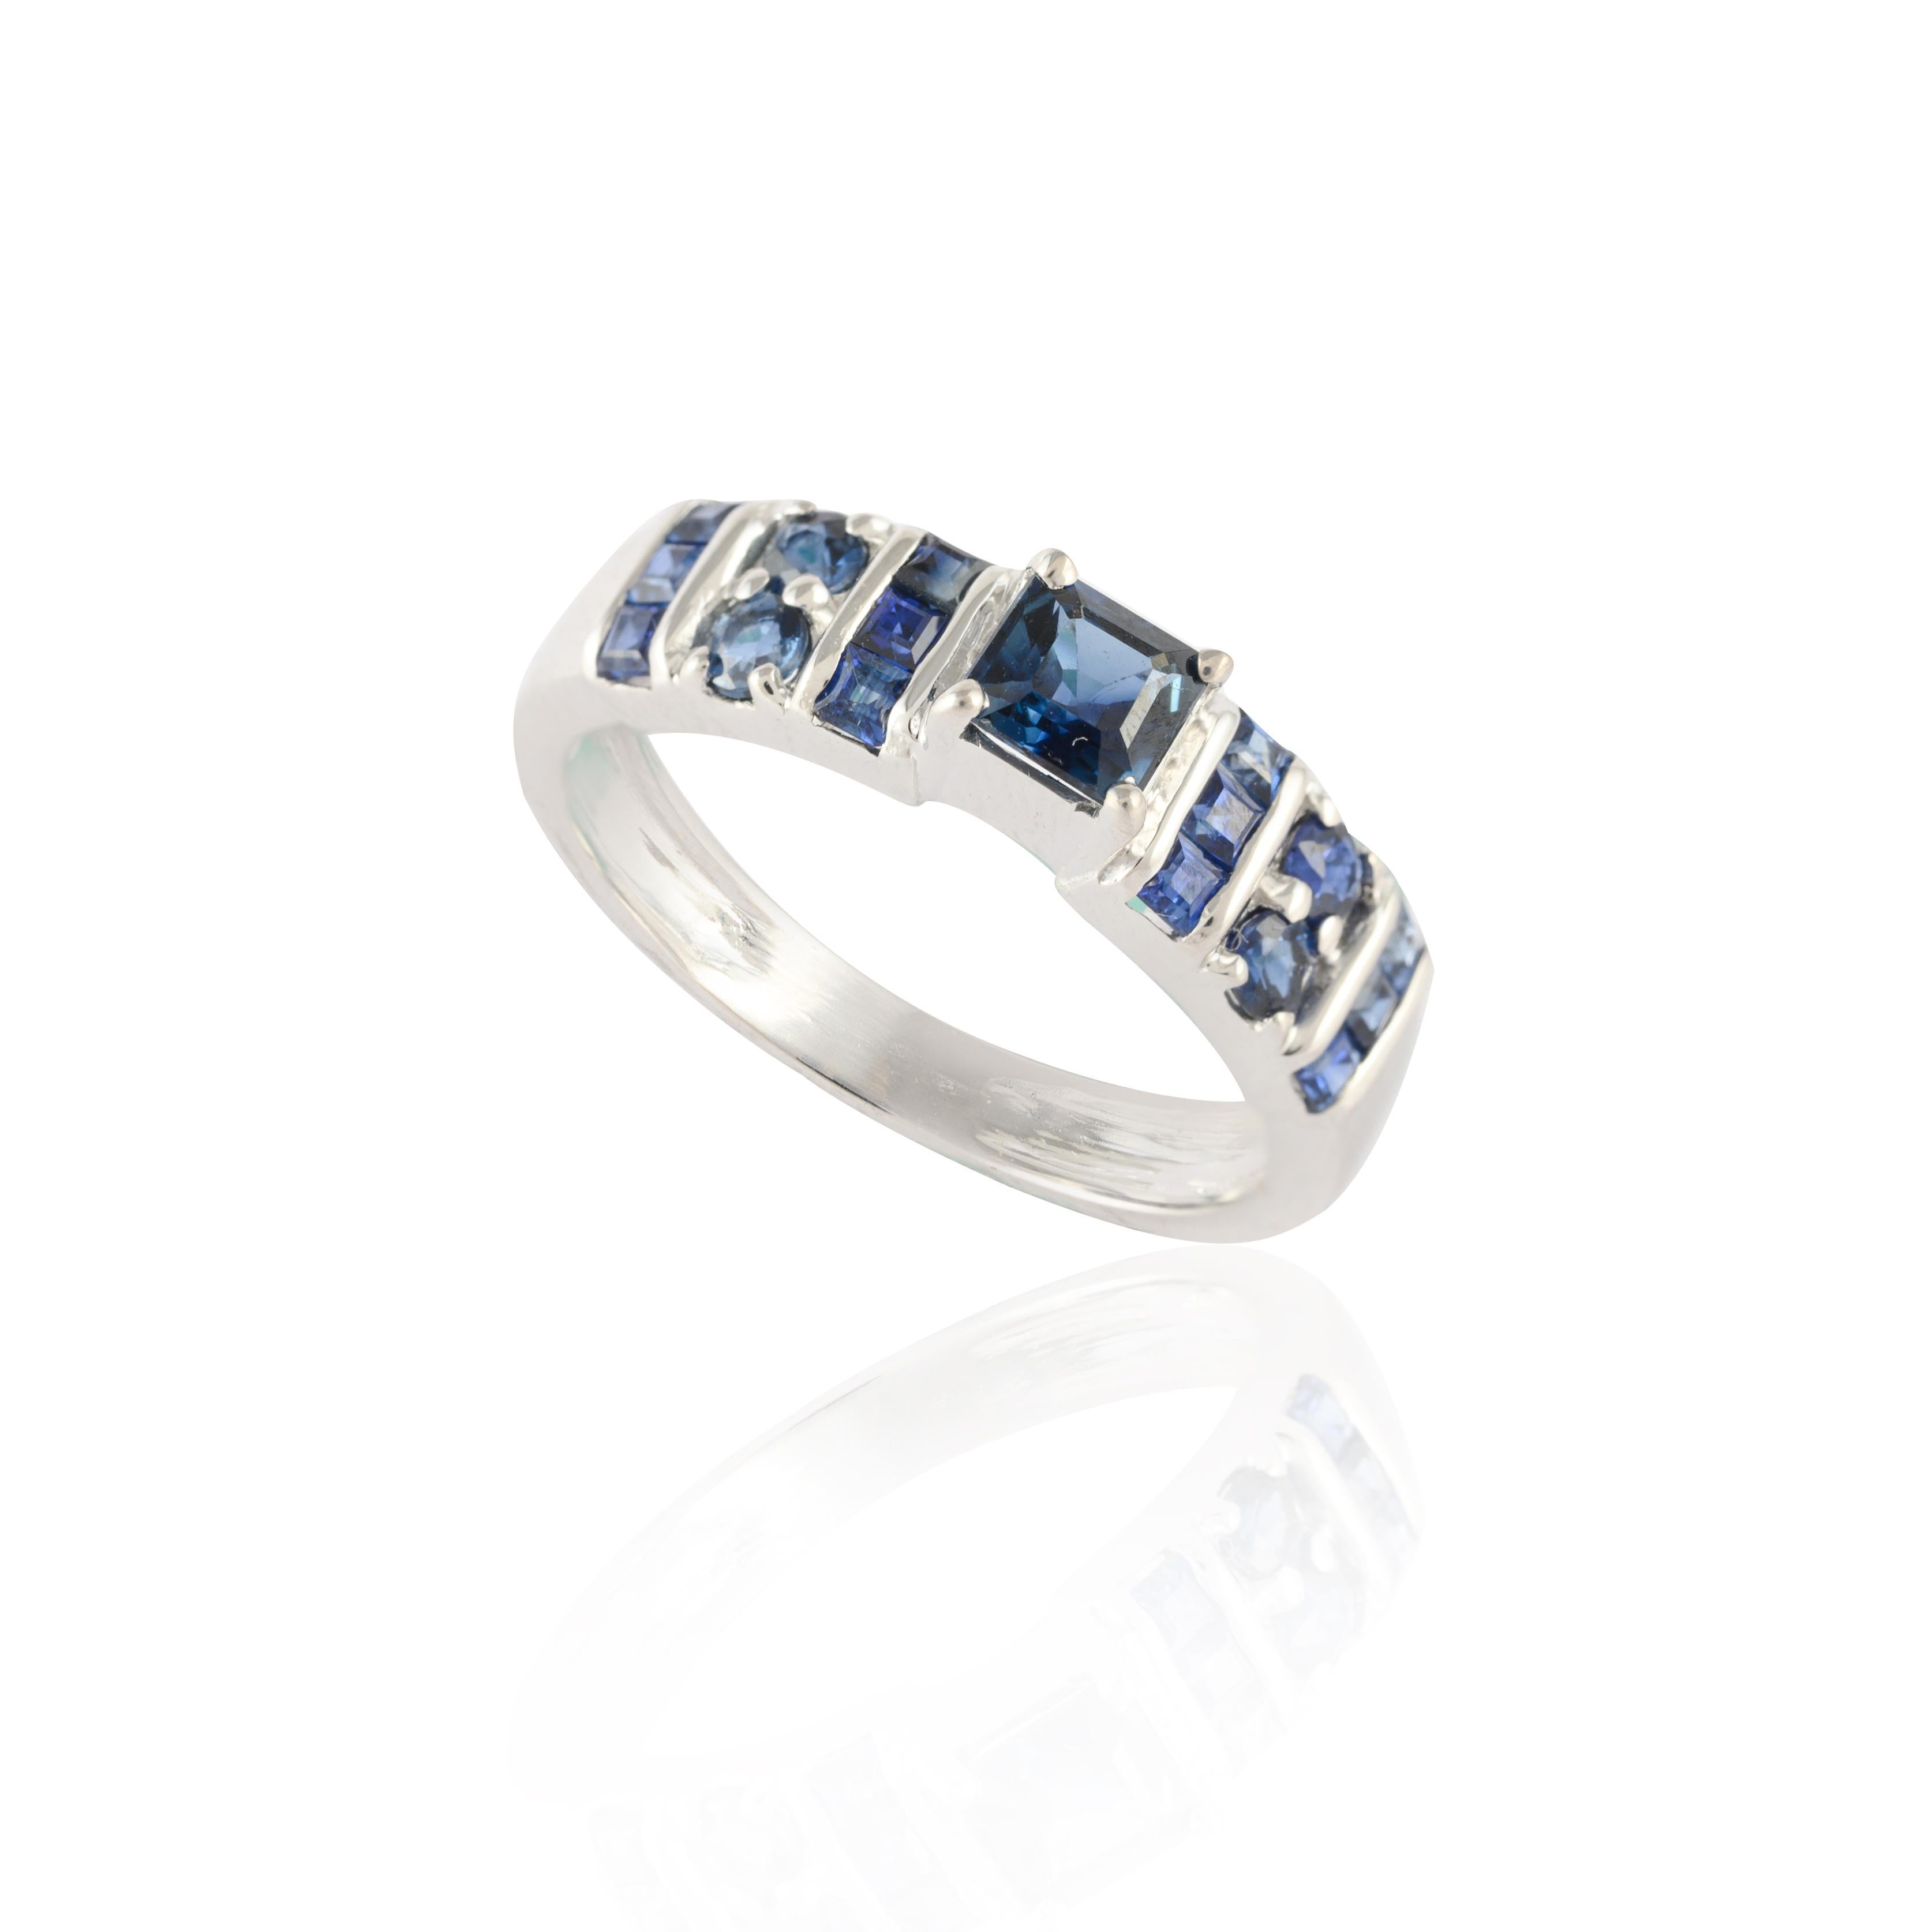 For Sale:  Natural Dark Blue Sapphire Ring Embedded in 14K Solid White Gold 9